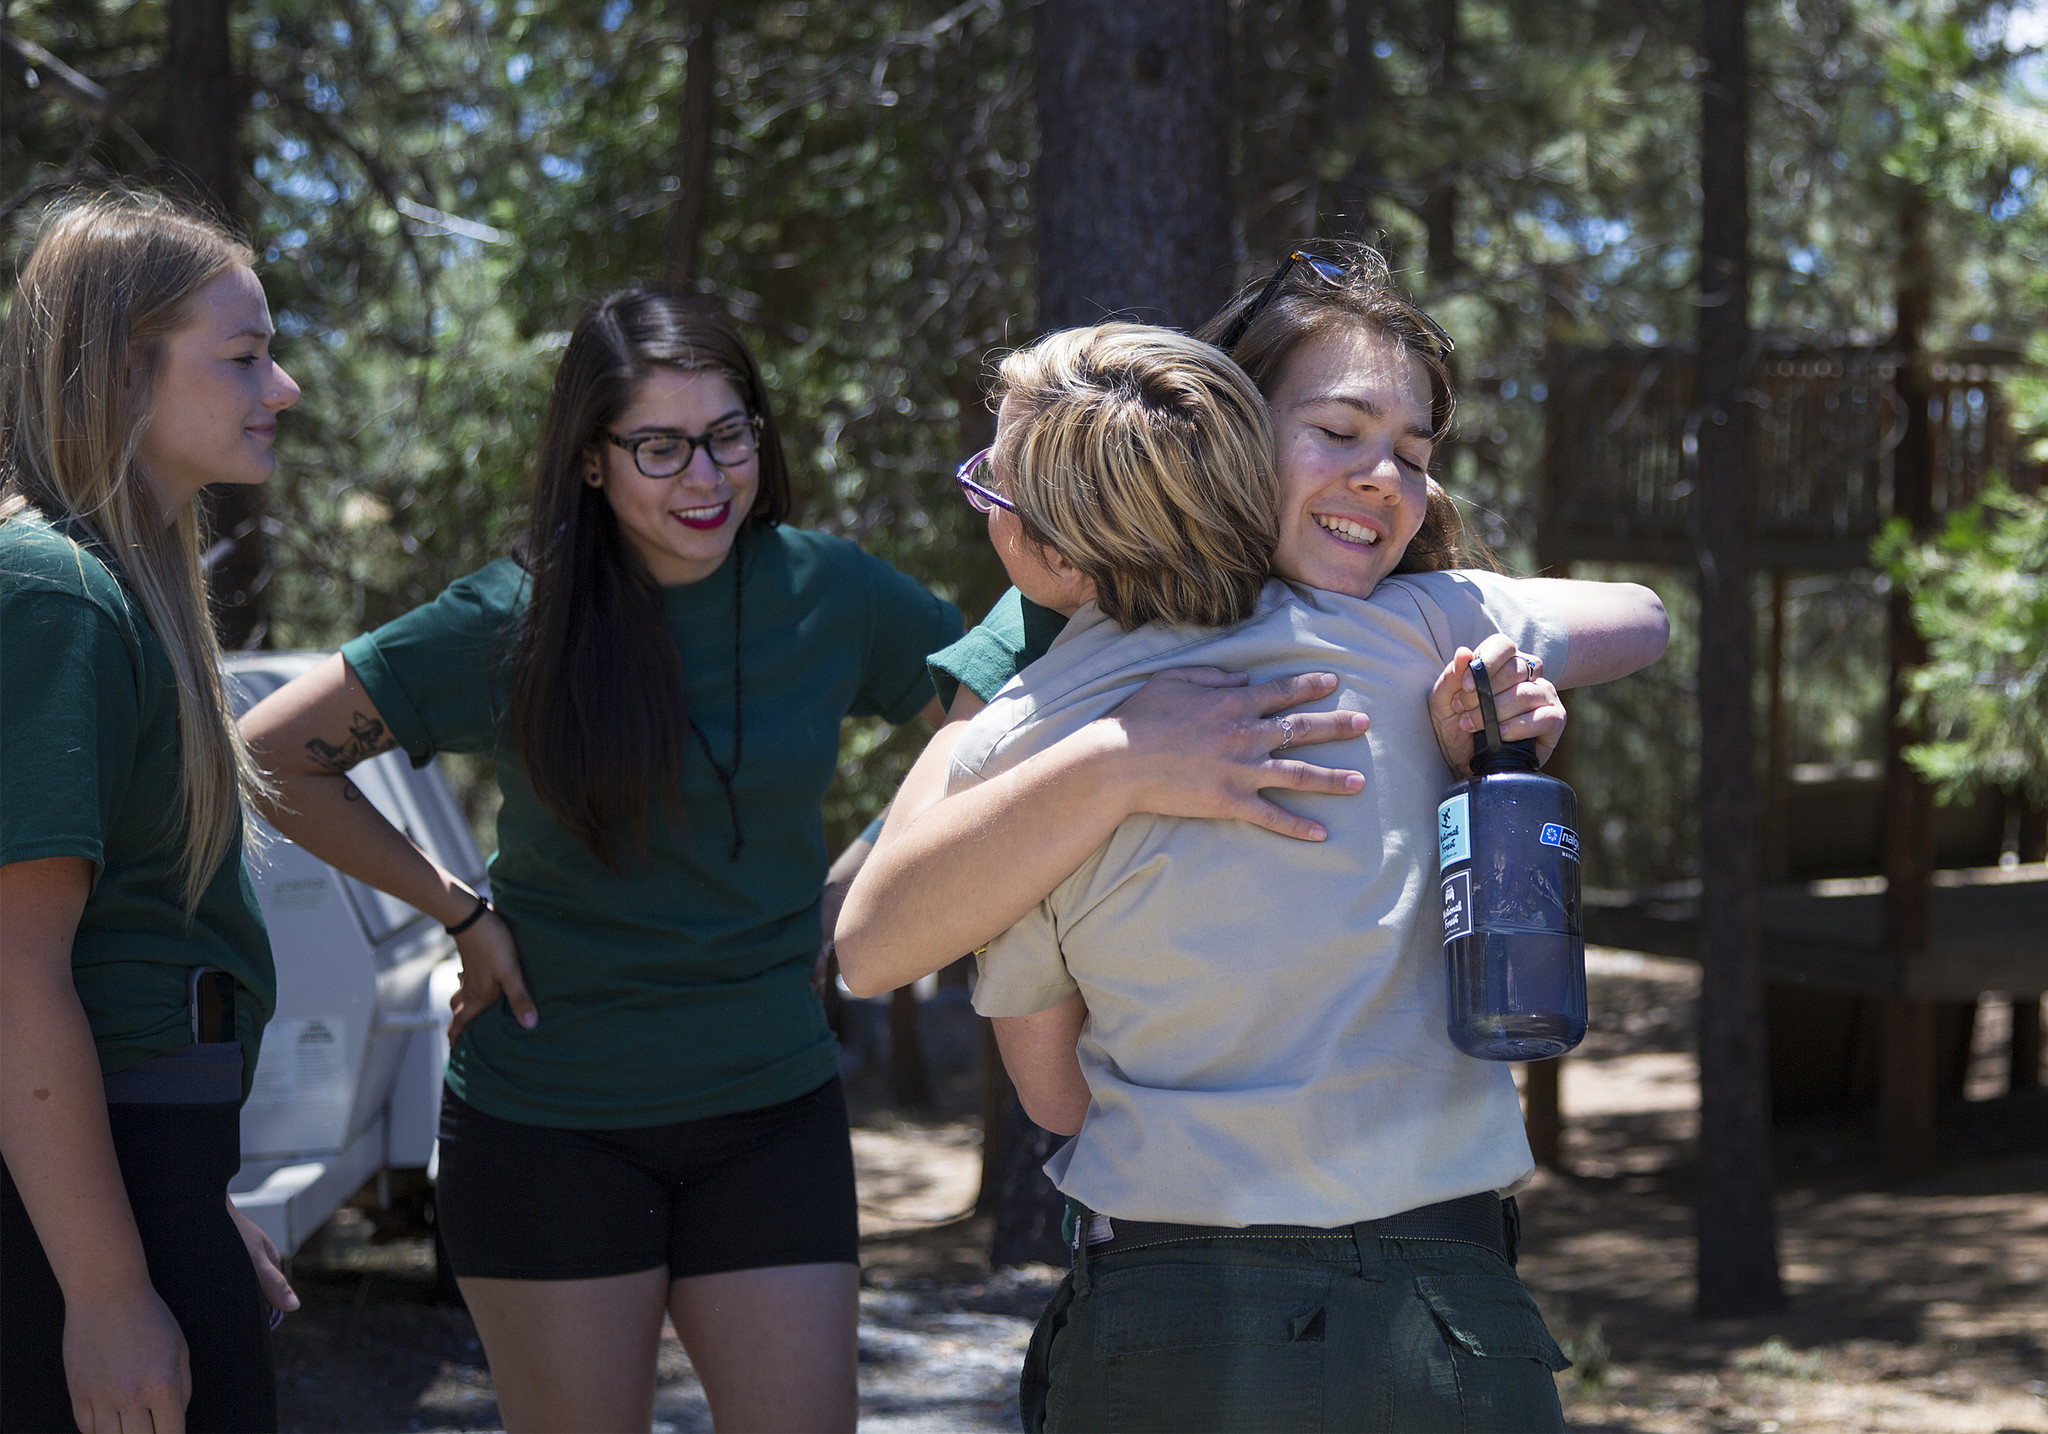 Adela Montserrat Valencia of Cameron Park, holding a water bottle, gets a hug from Kristen Allison of the U.S. Forest Service after graduating from the training camp.